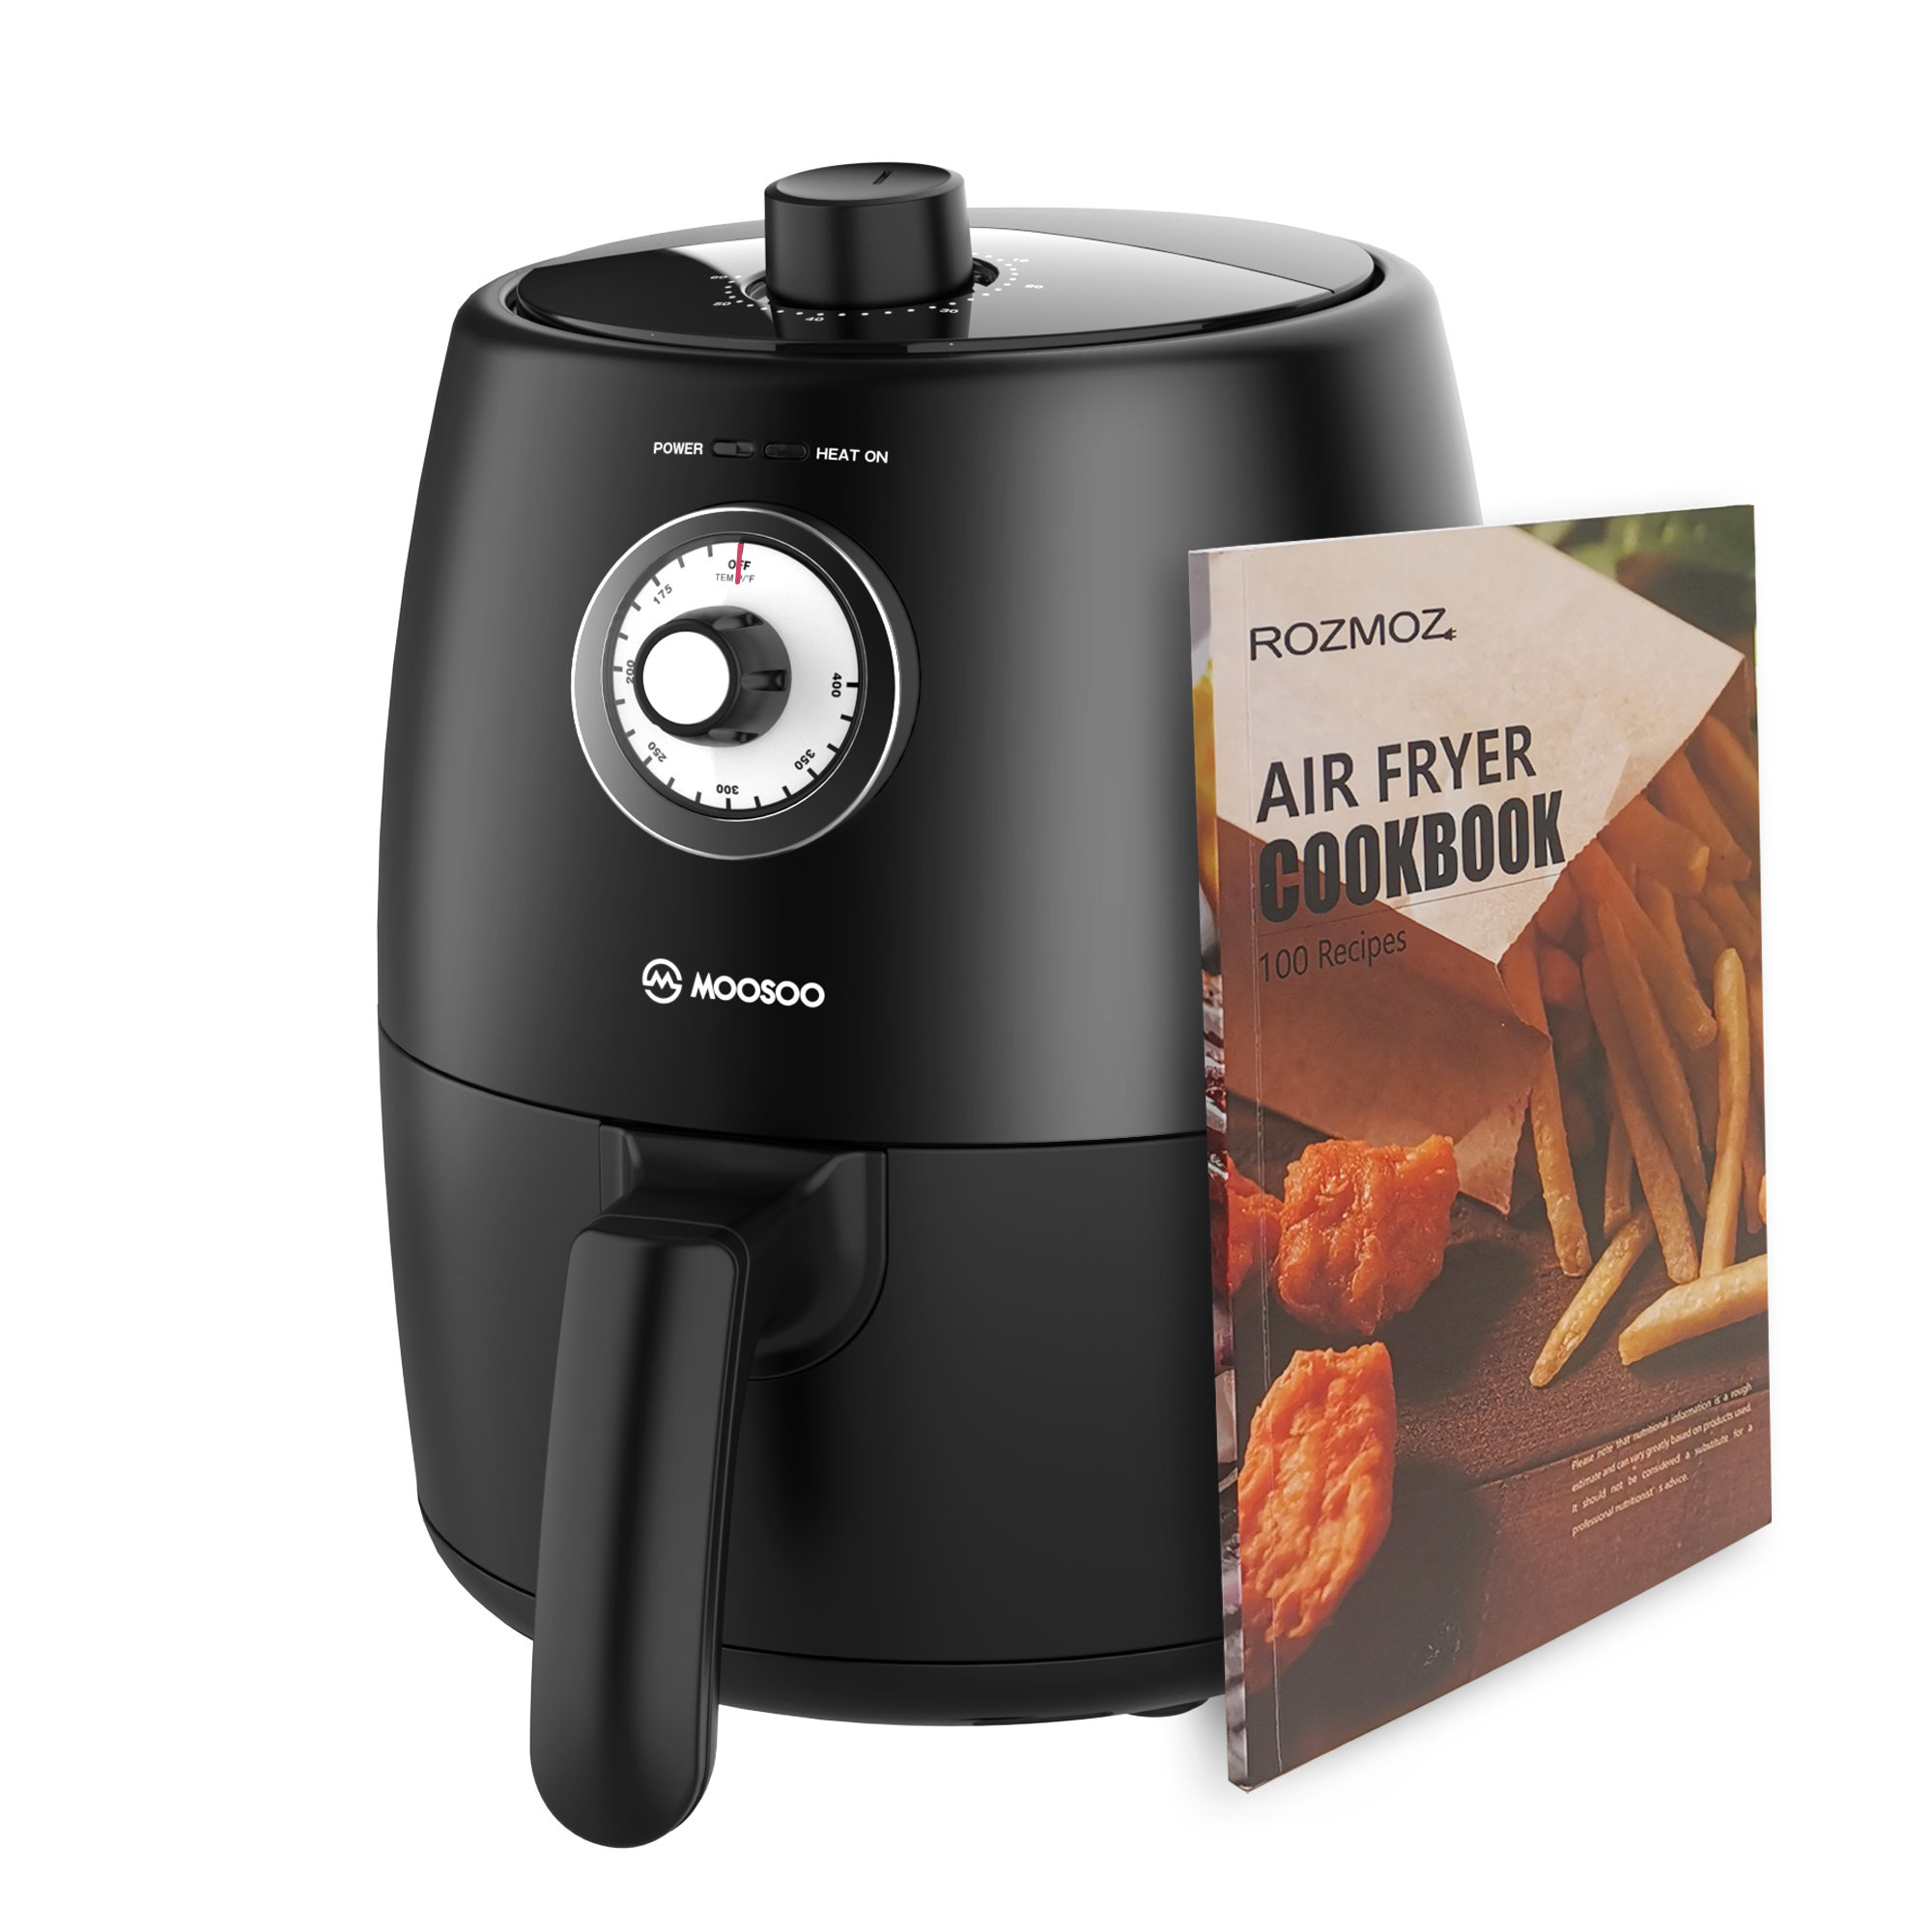 Caynel 5 Quart Digital LED Touch Screen Air Fryer, 1400W Countertop Oven, Black